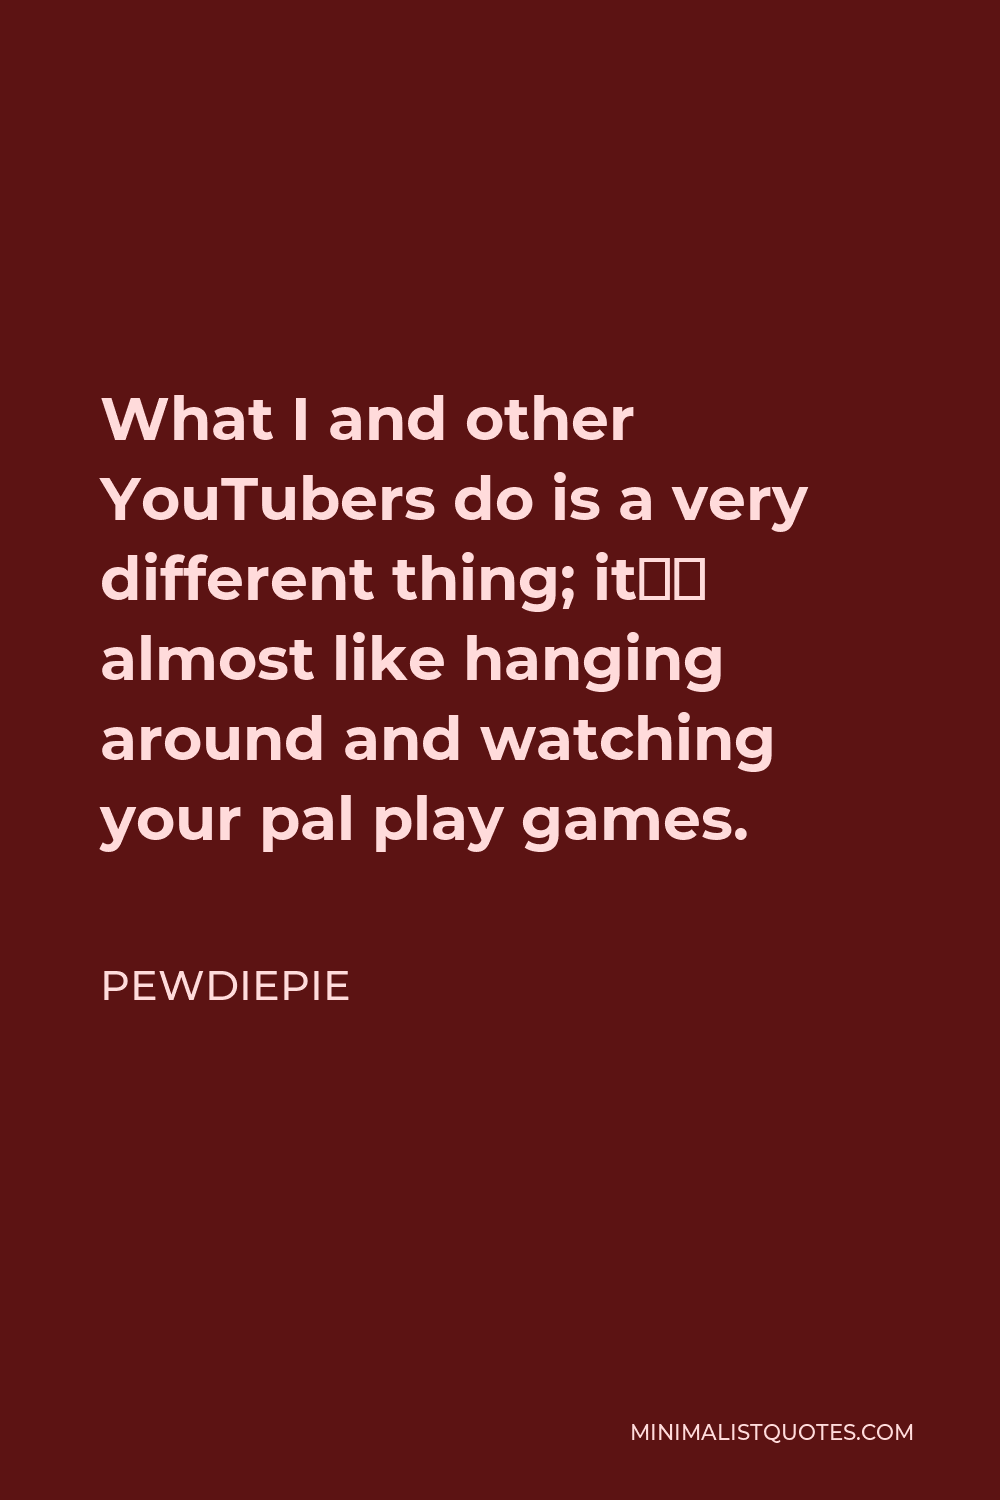 PewDiePie Quote - What I and other YouTubers do is a very different thing; it’s almost like hanging around and watching your pal play games.